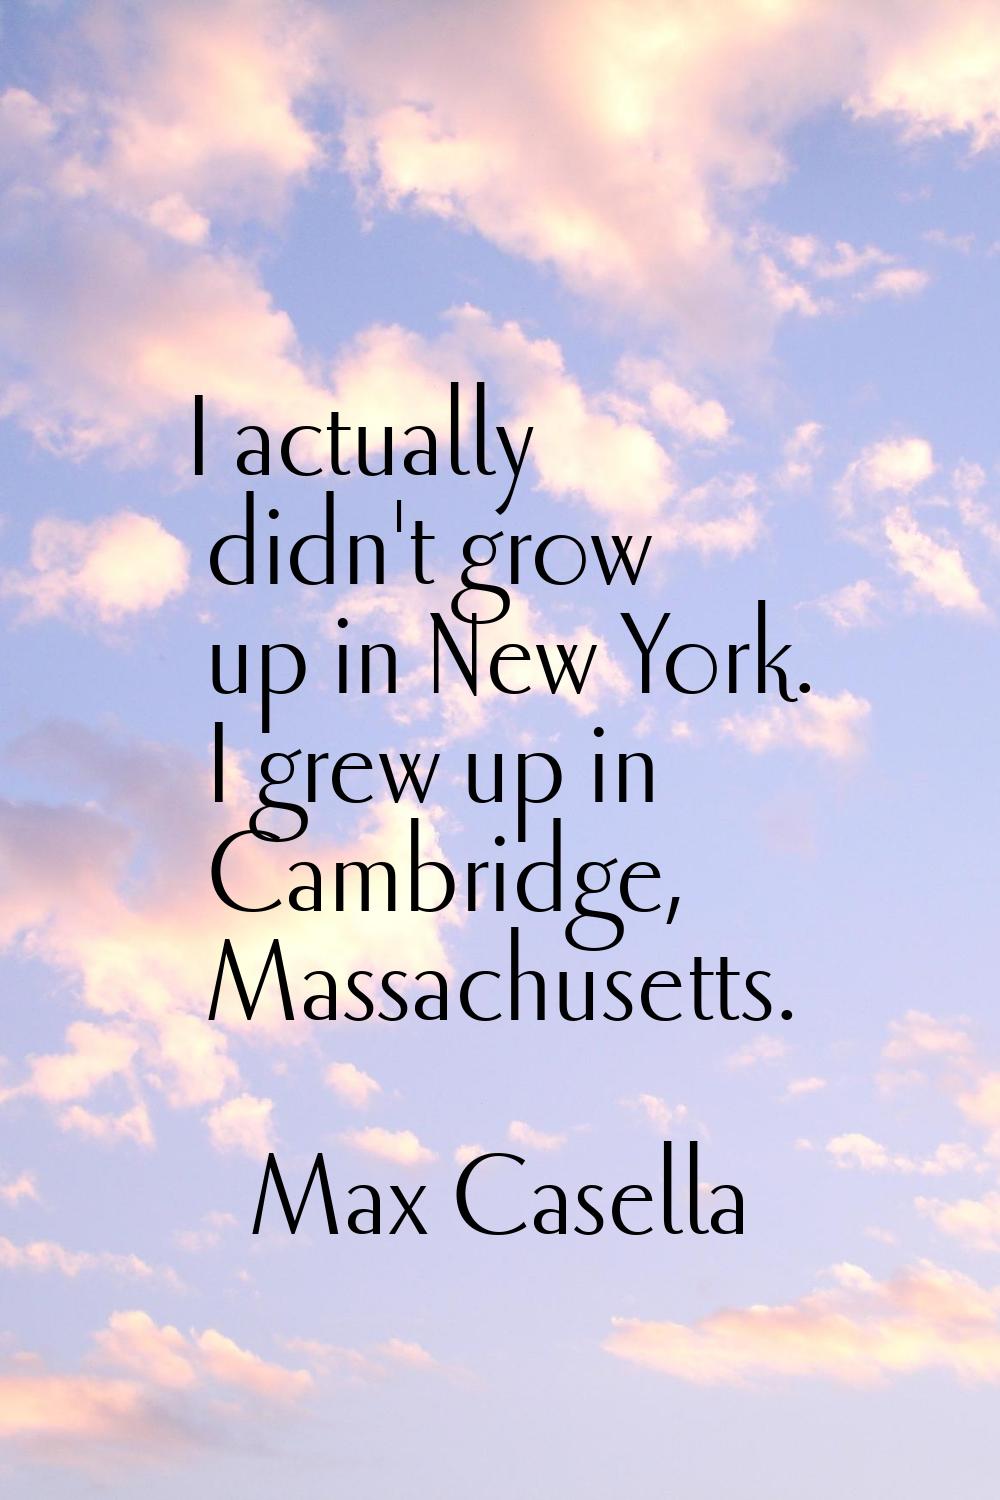 I actually didn't grow up in New York. I grew up in Cambridge, Massachusetts.